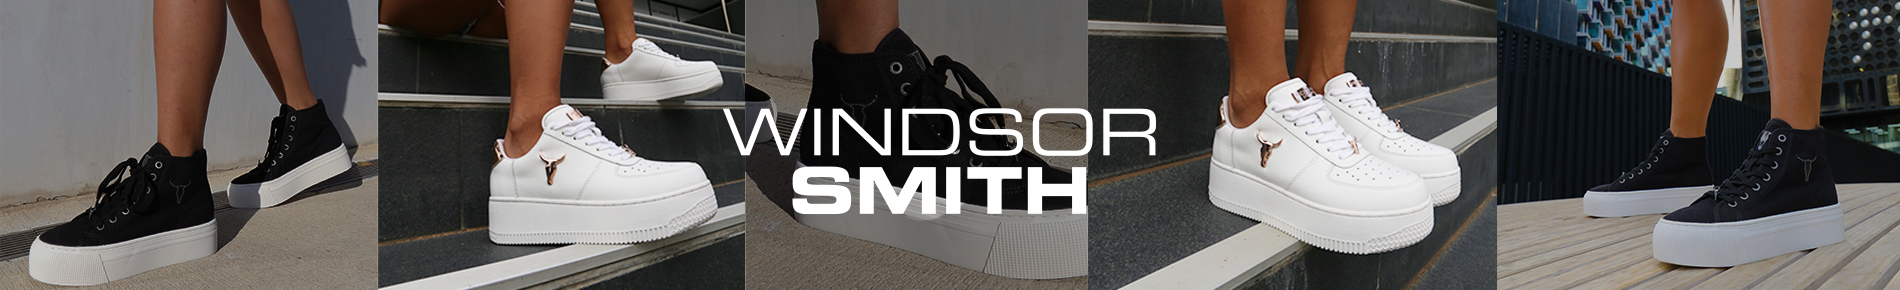 windsor smith shoes myer